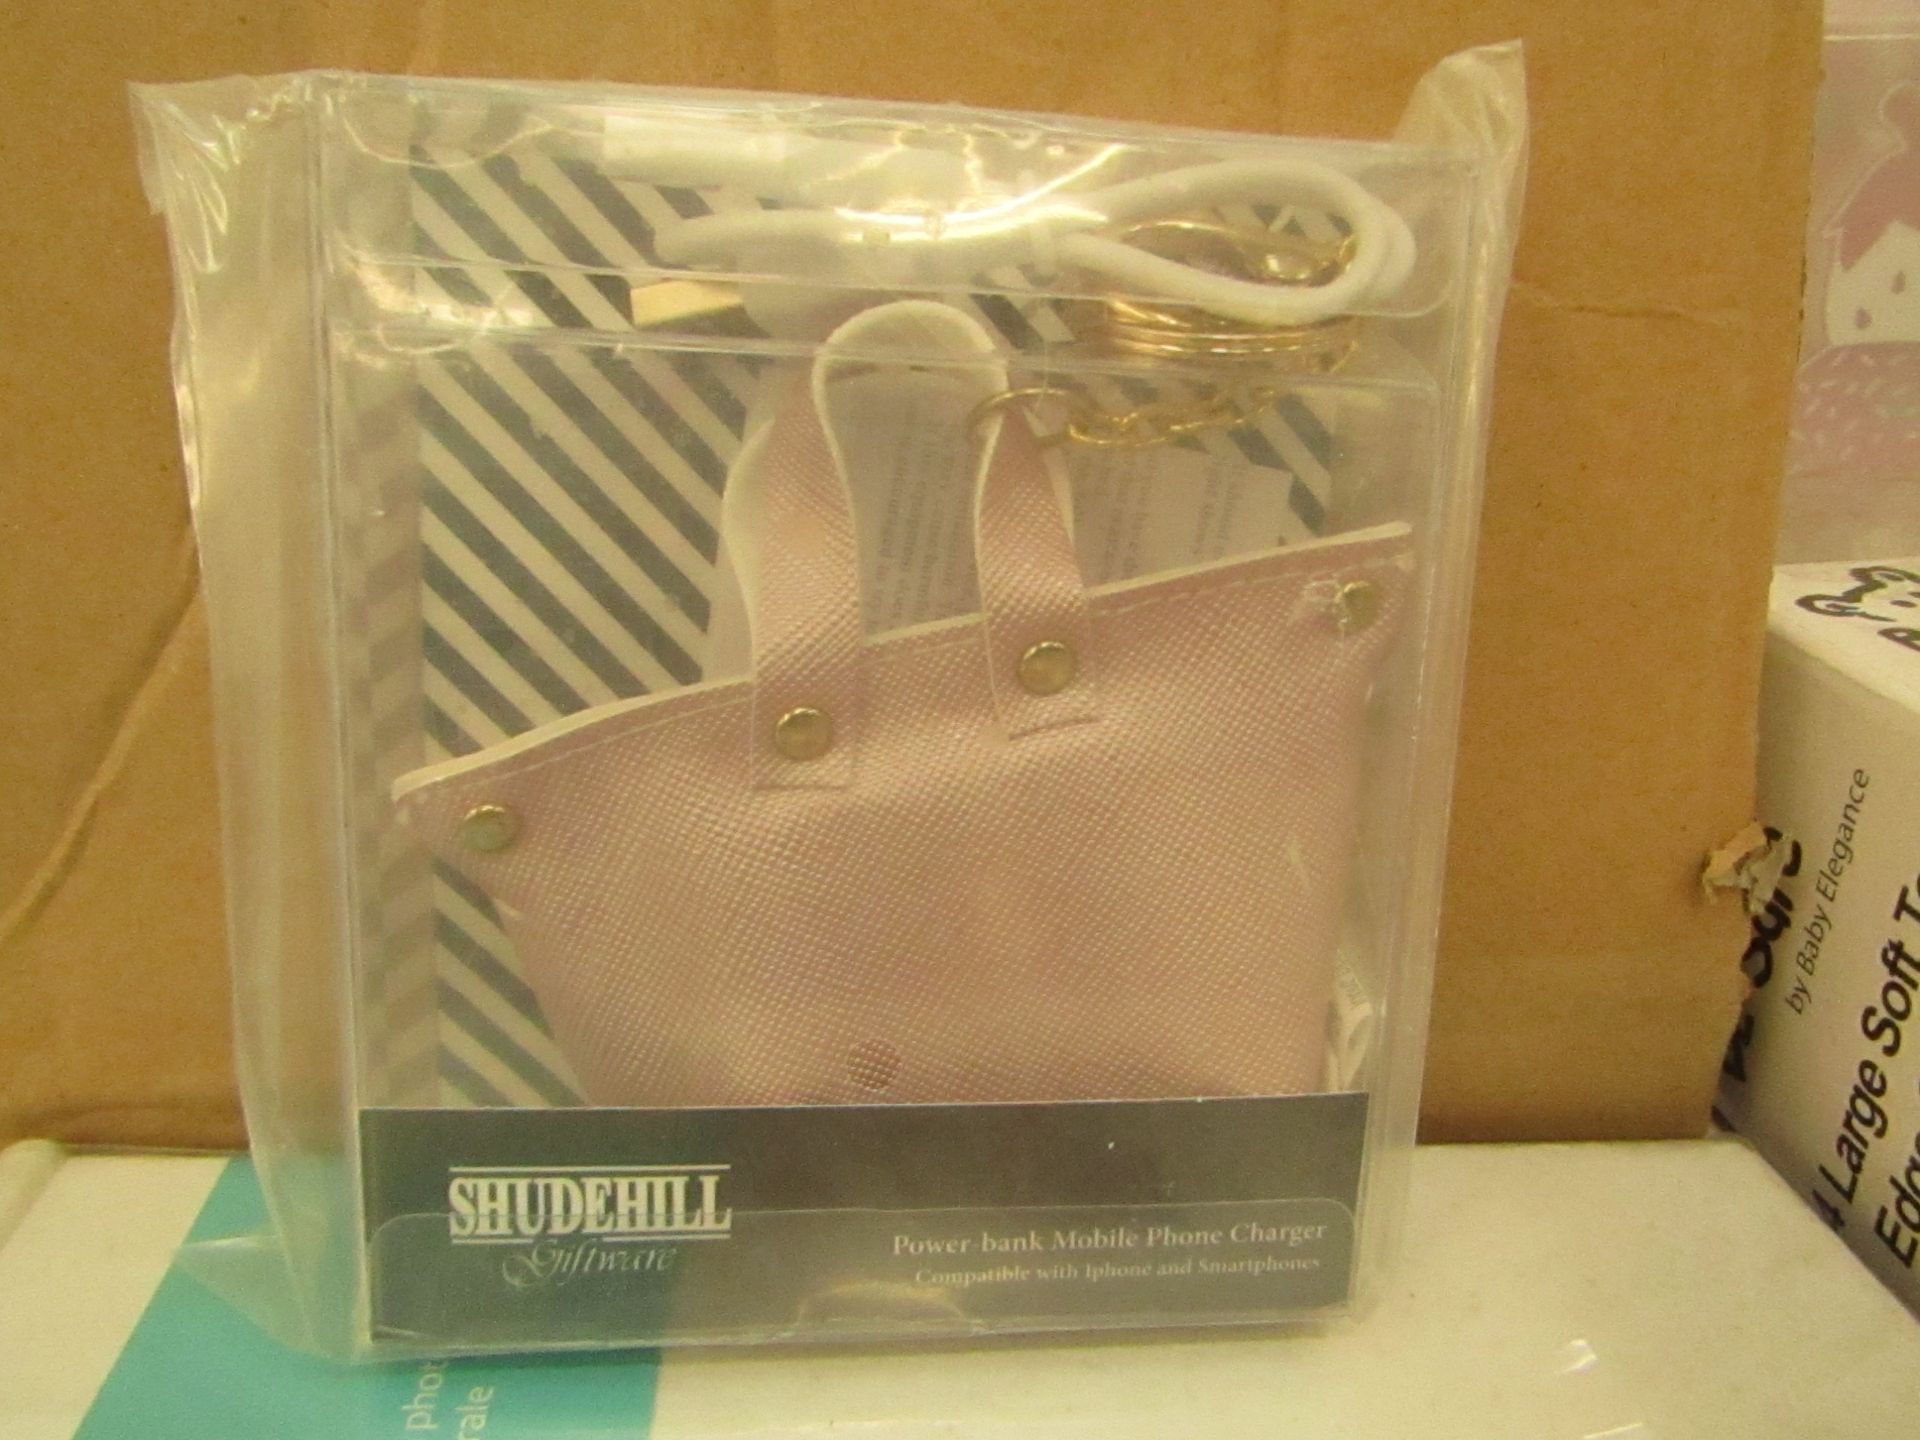 5x Shudehill - Power Bank Mobile Phone Charger ( Pink ) - Untested & Packaged.